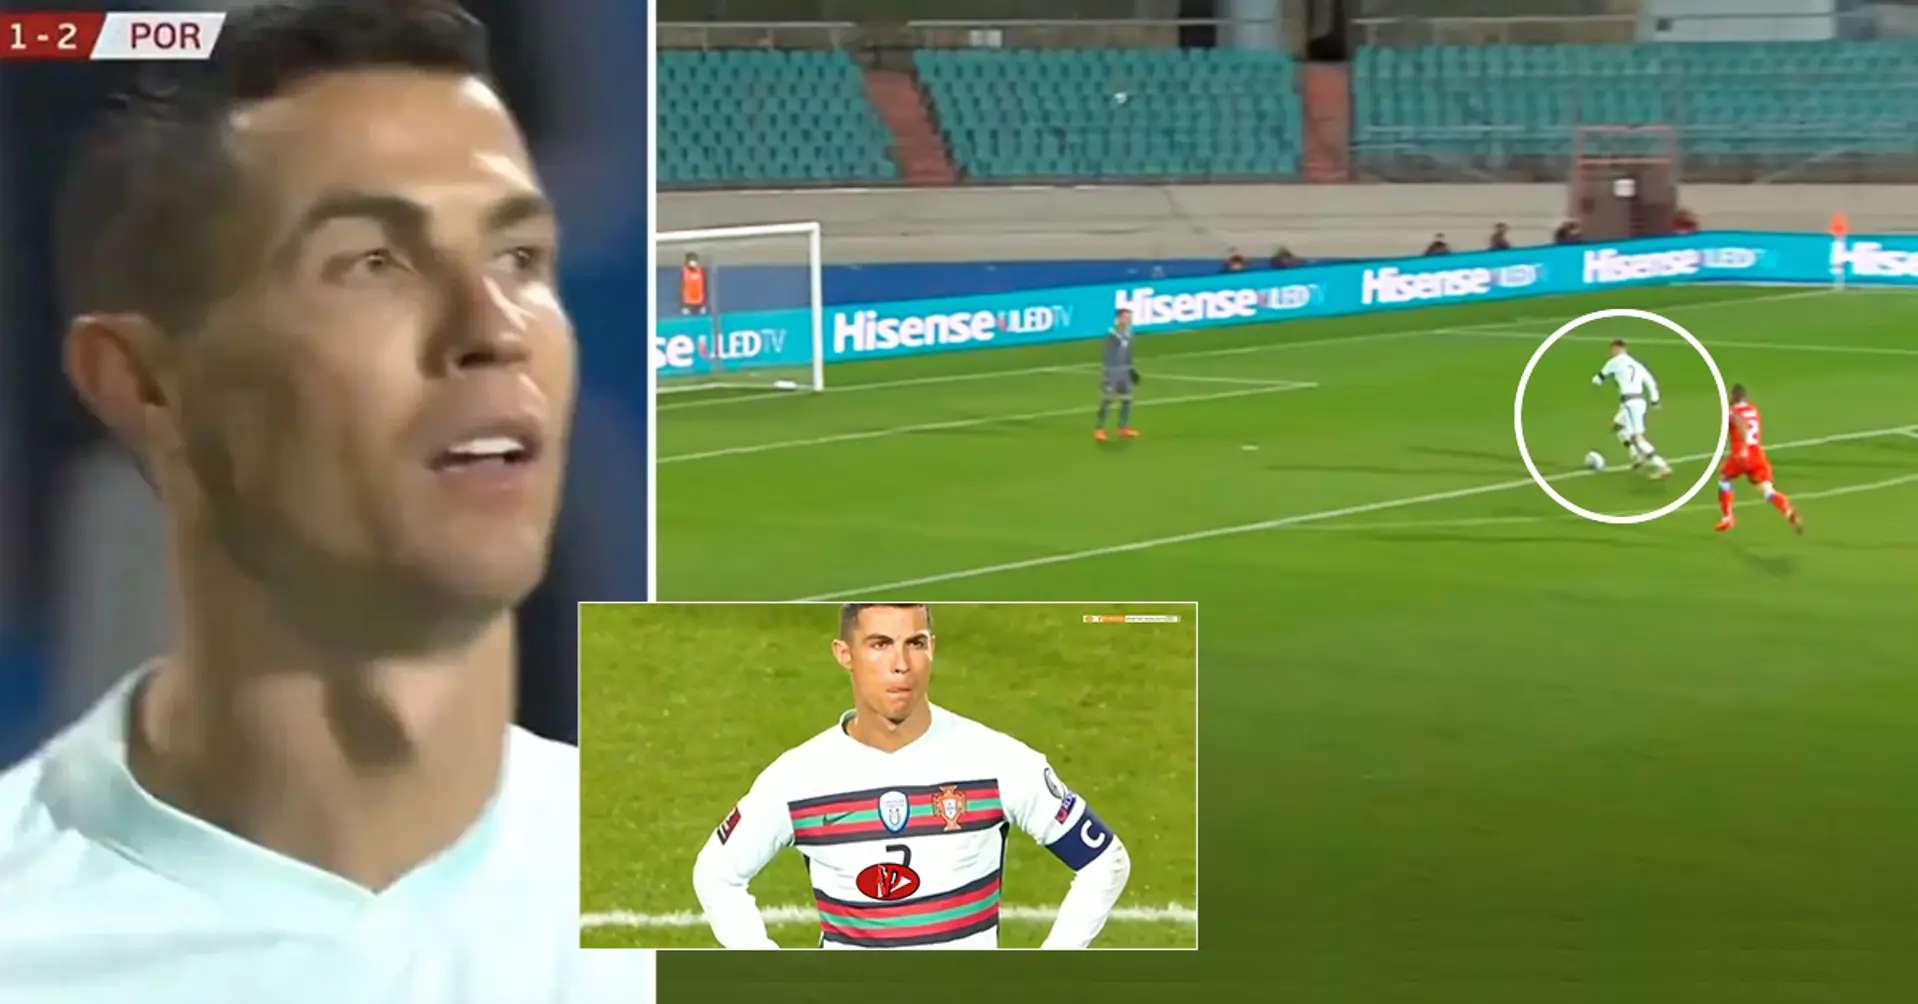 Cristiano Ronaldo misses incredible 1-on-1 chance against Luxembourg, goalkeeper doesn't even try